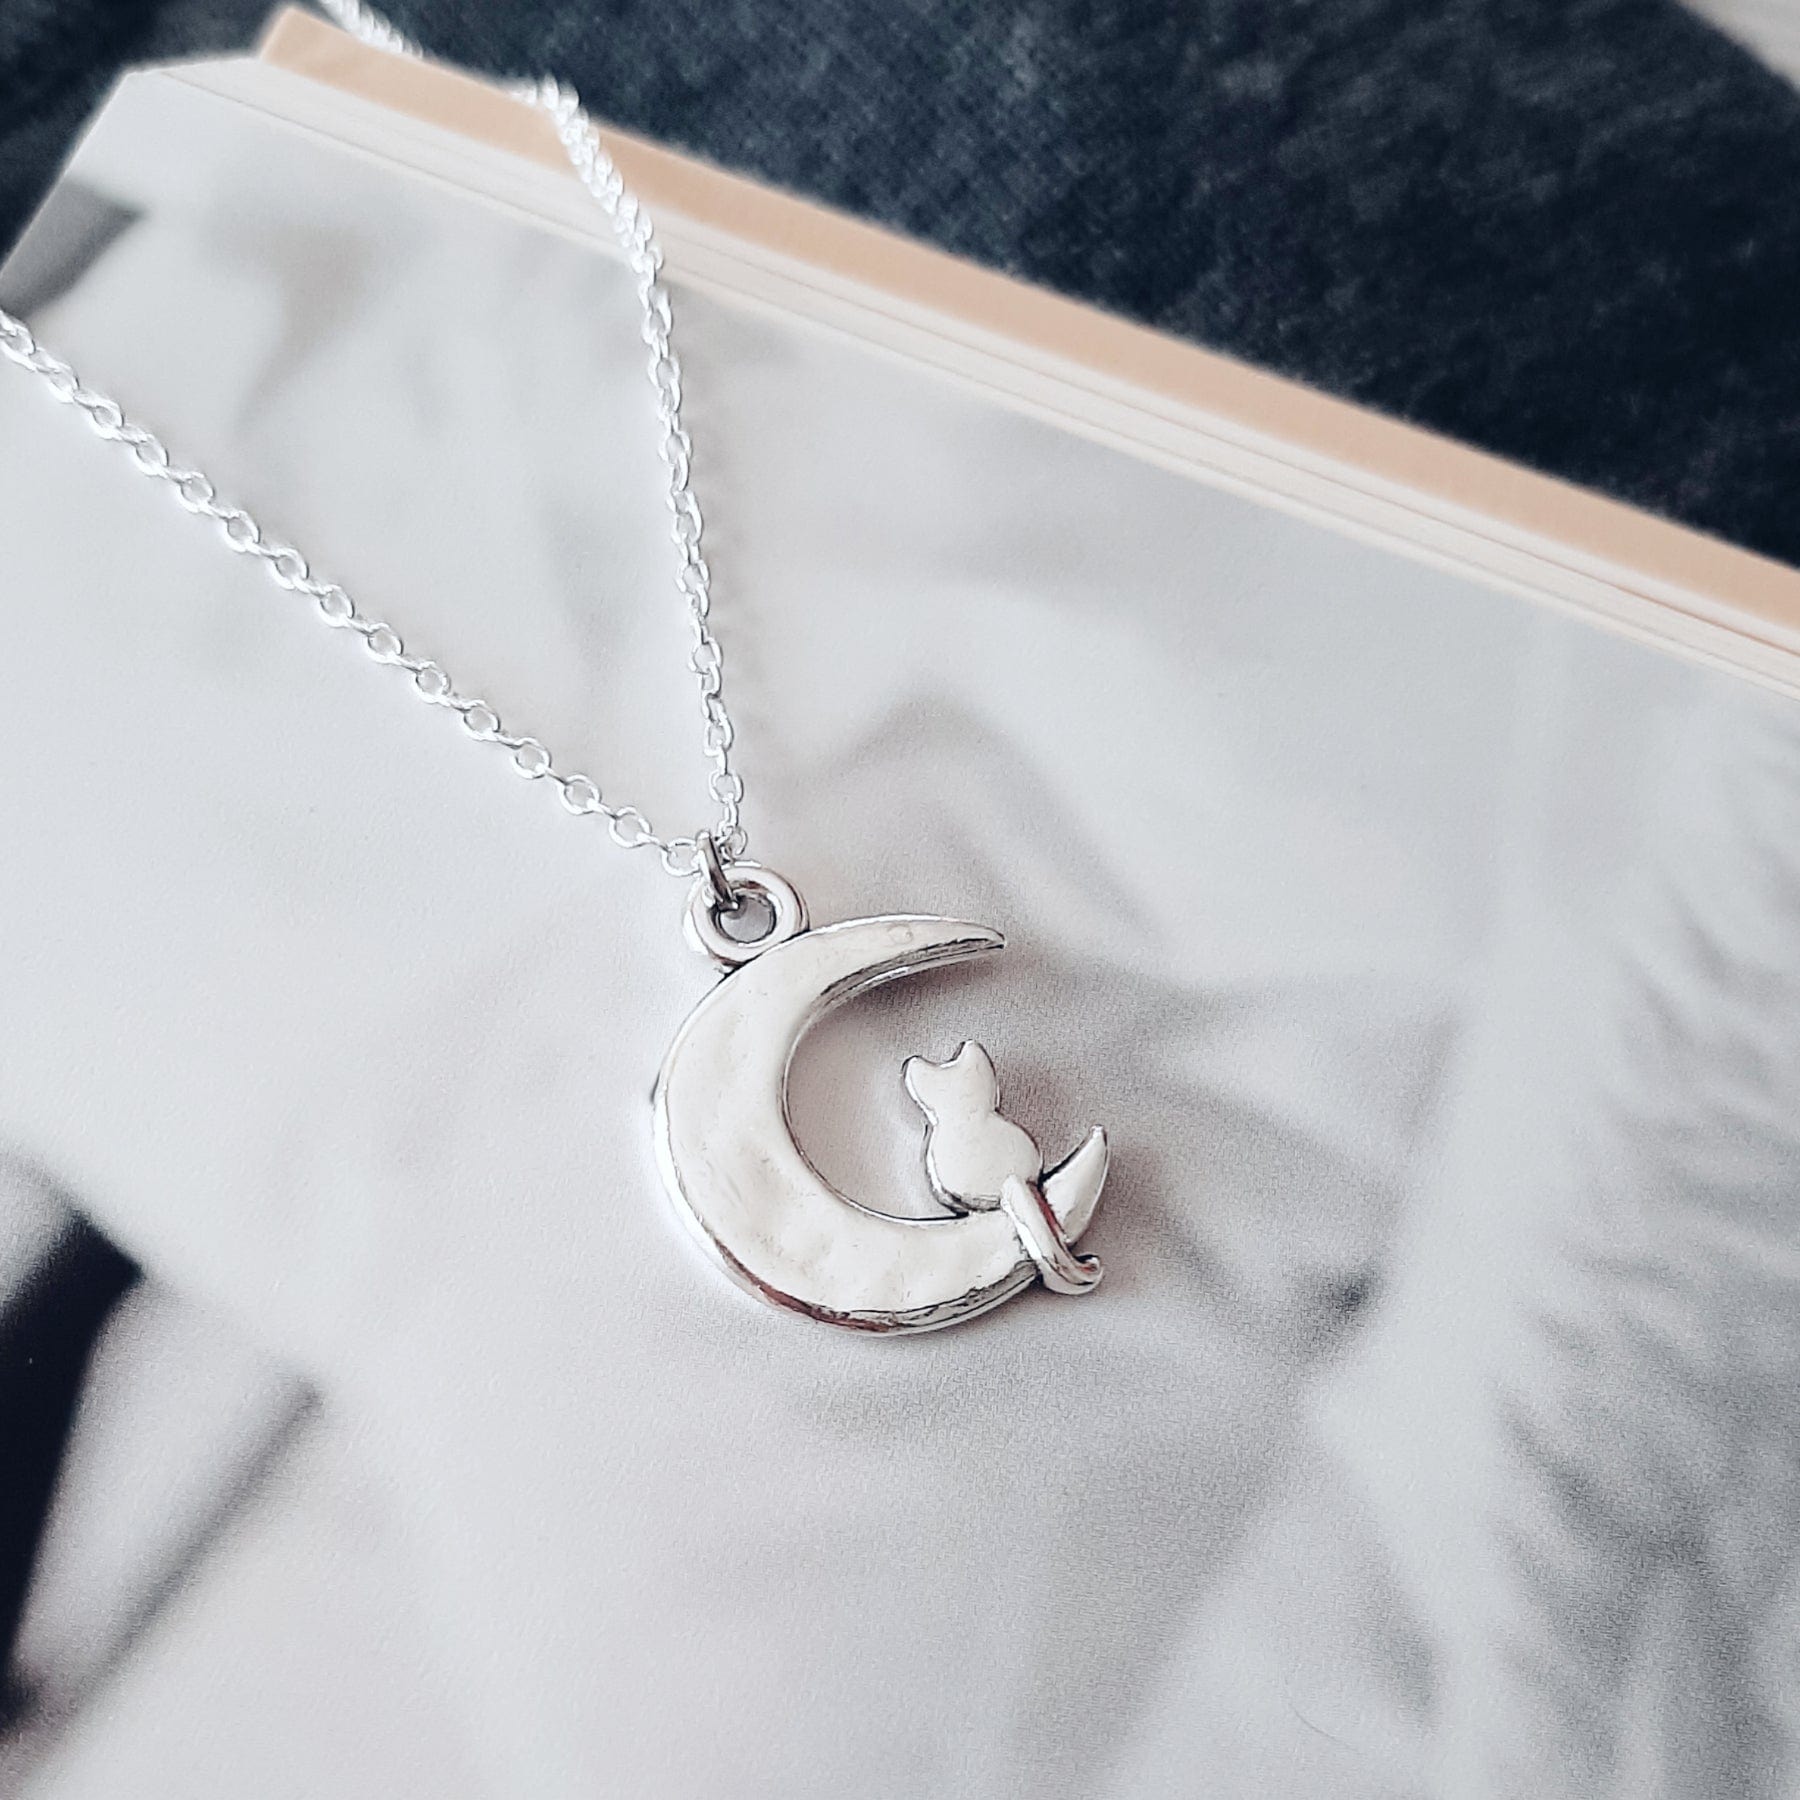 Shop Silver Kitty Cat on The Moon Pendant Necklace for Cat Lovers | Gift for Birthday, Christmas, Mother's Day, Anniversary and Valentine's Day, Necklaces, USA Boutique